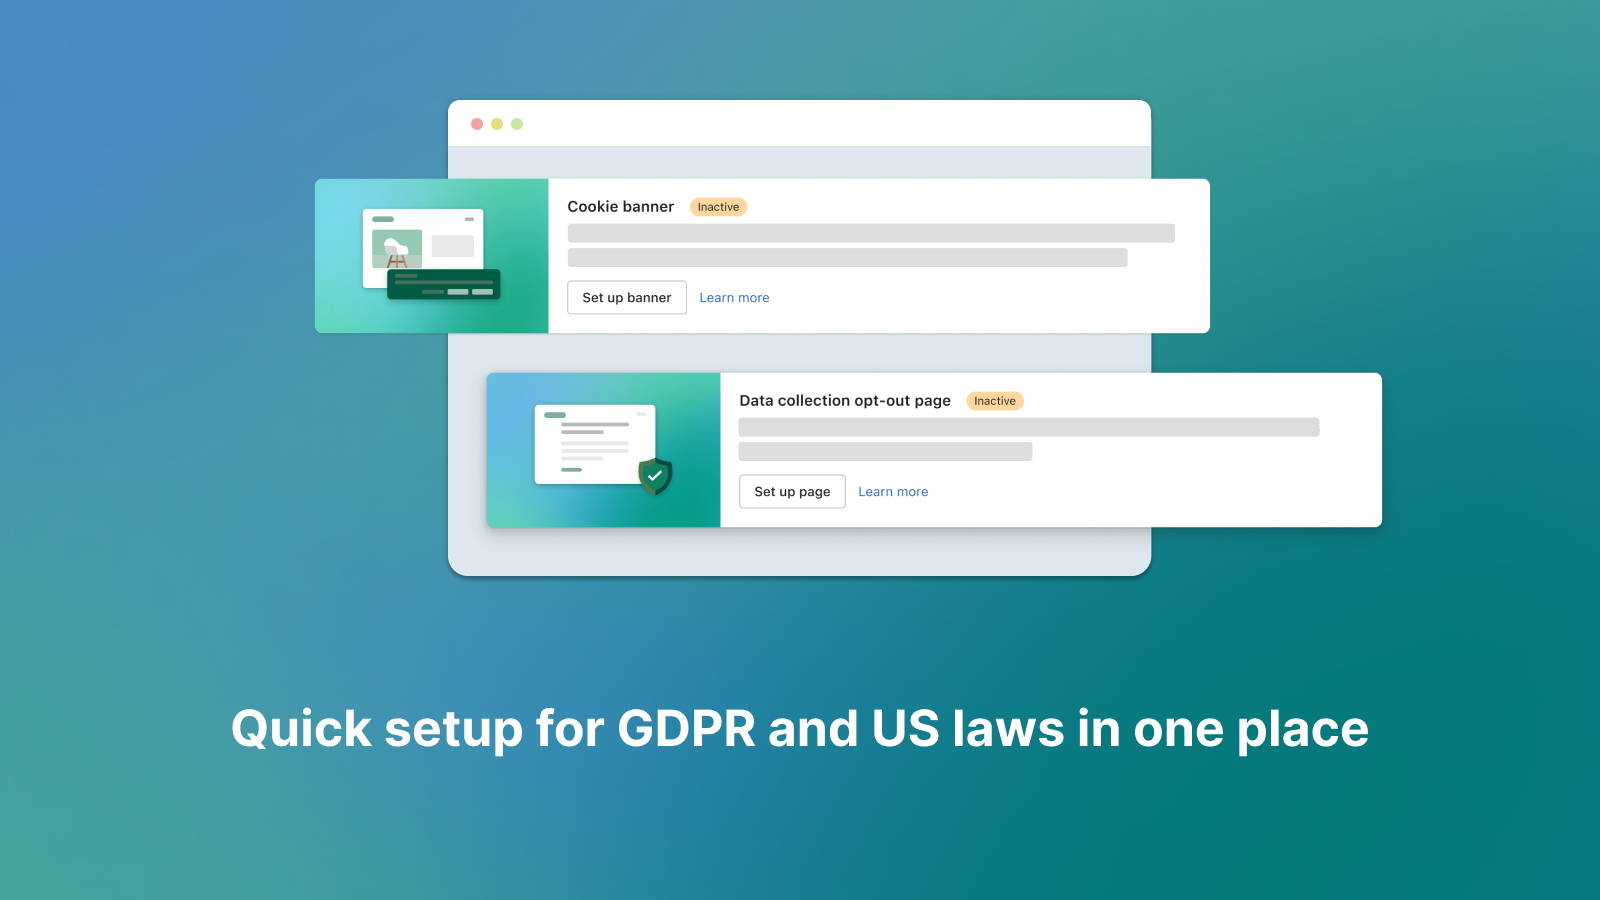 Quick setup for GDPR and US State laws in one place